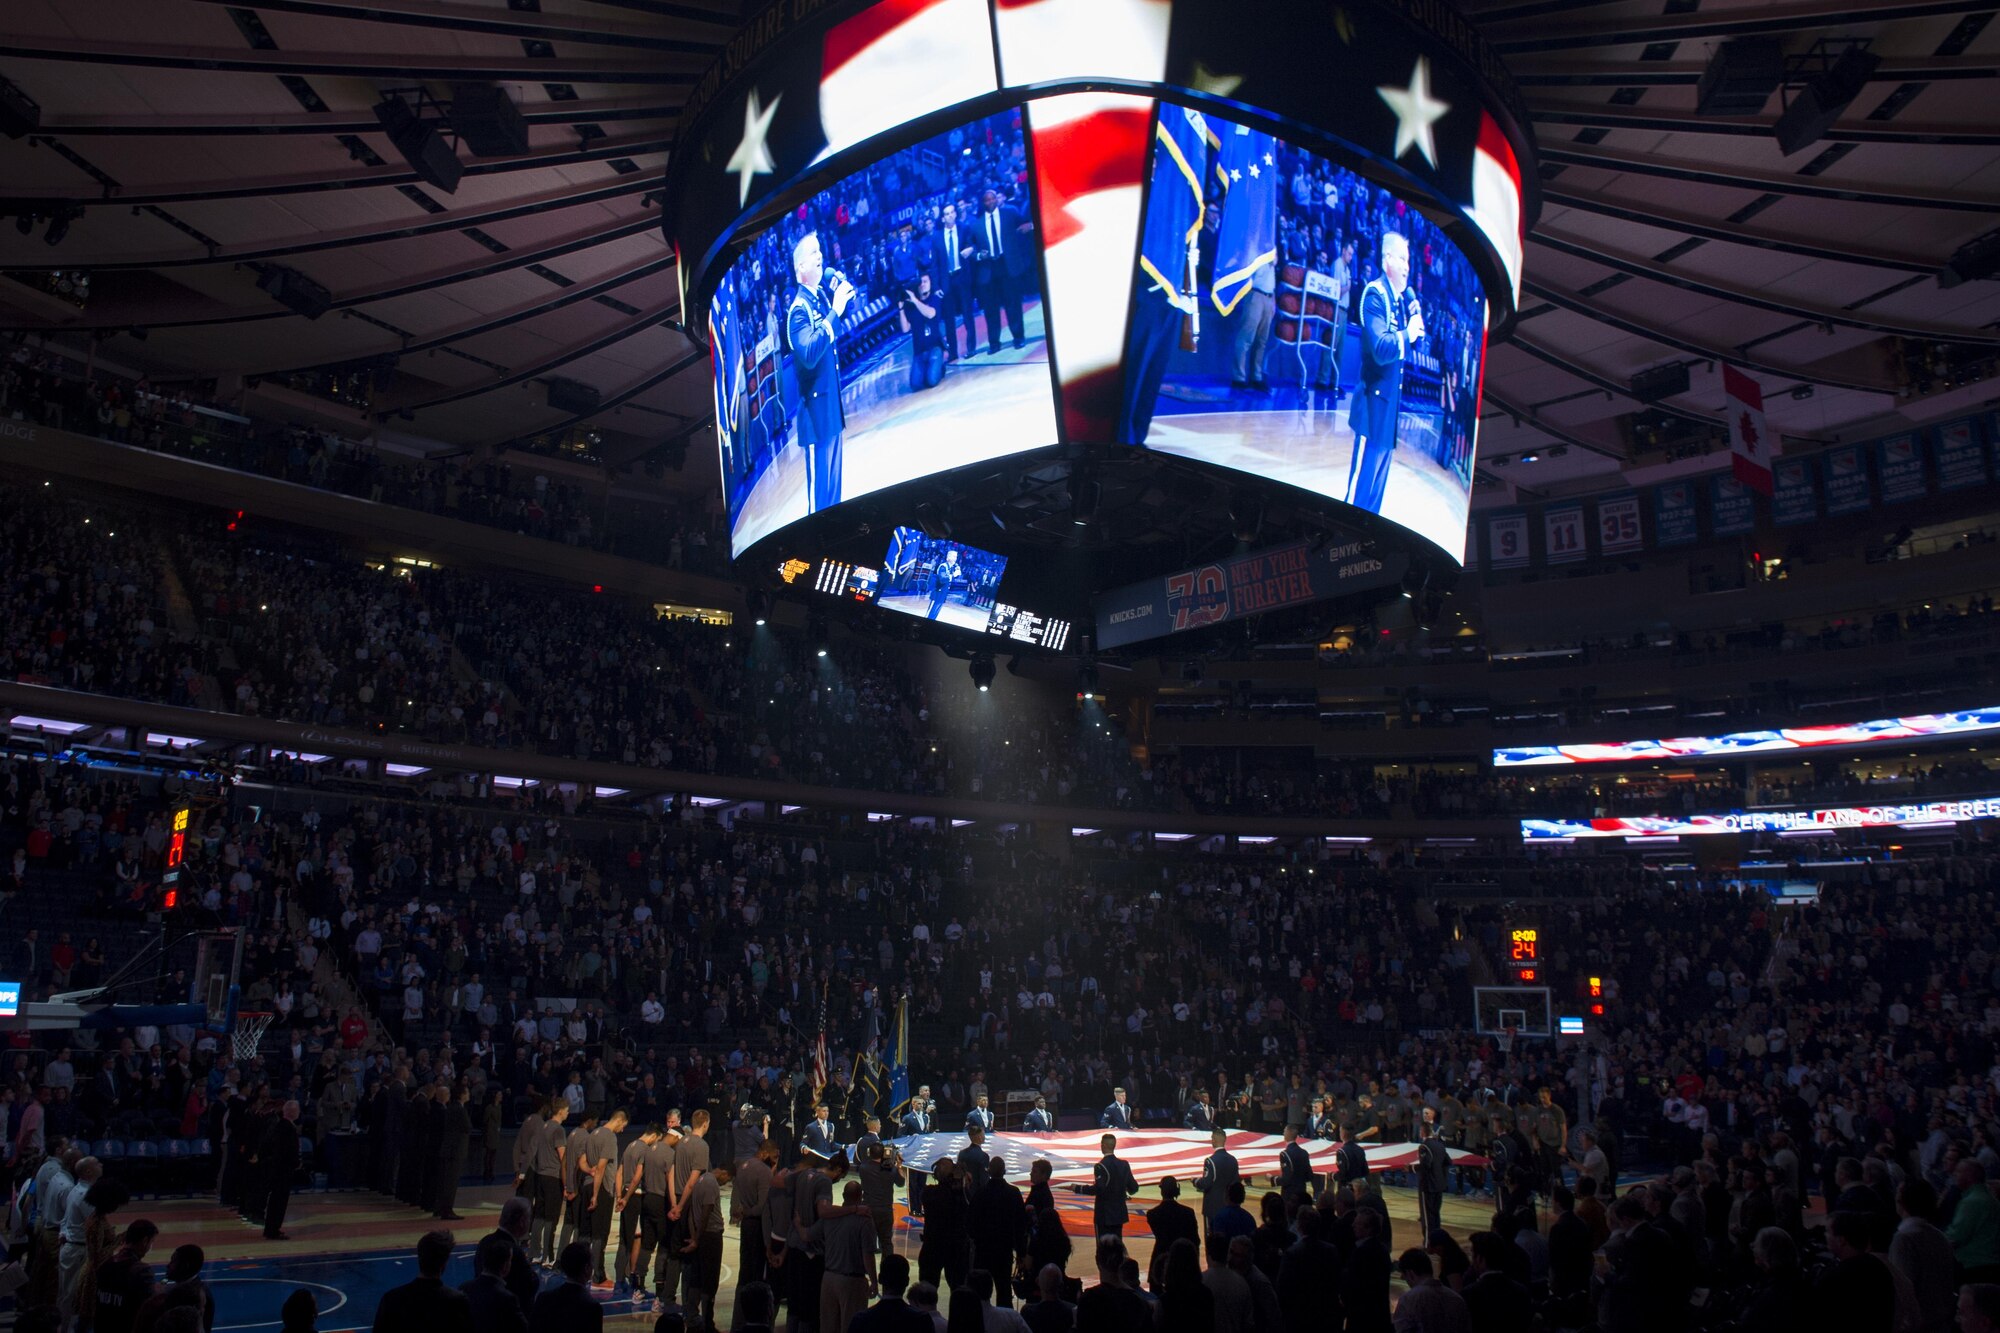 Members of the U.S. Air Force Honor Guard Drill Team present colors and hold the American flag during the National Anthem before the New York Knicks game at Madison Square Garden in New York, Nov. 9, 2016. The drill team was later featured during halftime as part of a Knicks military appreciation night. (U.S. Air Force photo by Senior Airman Philip Bryant)